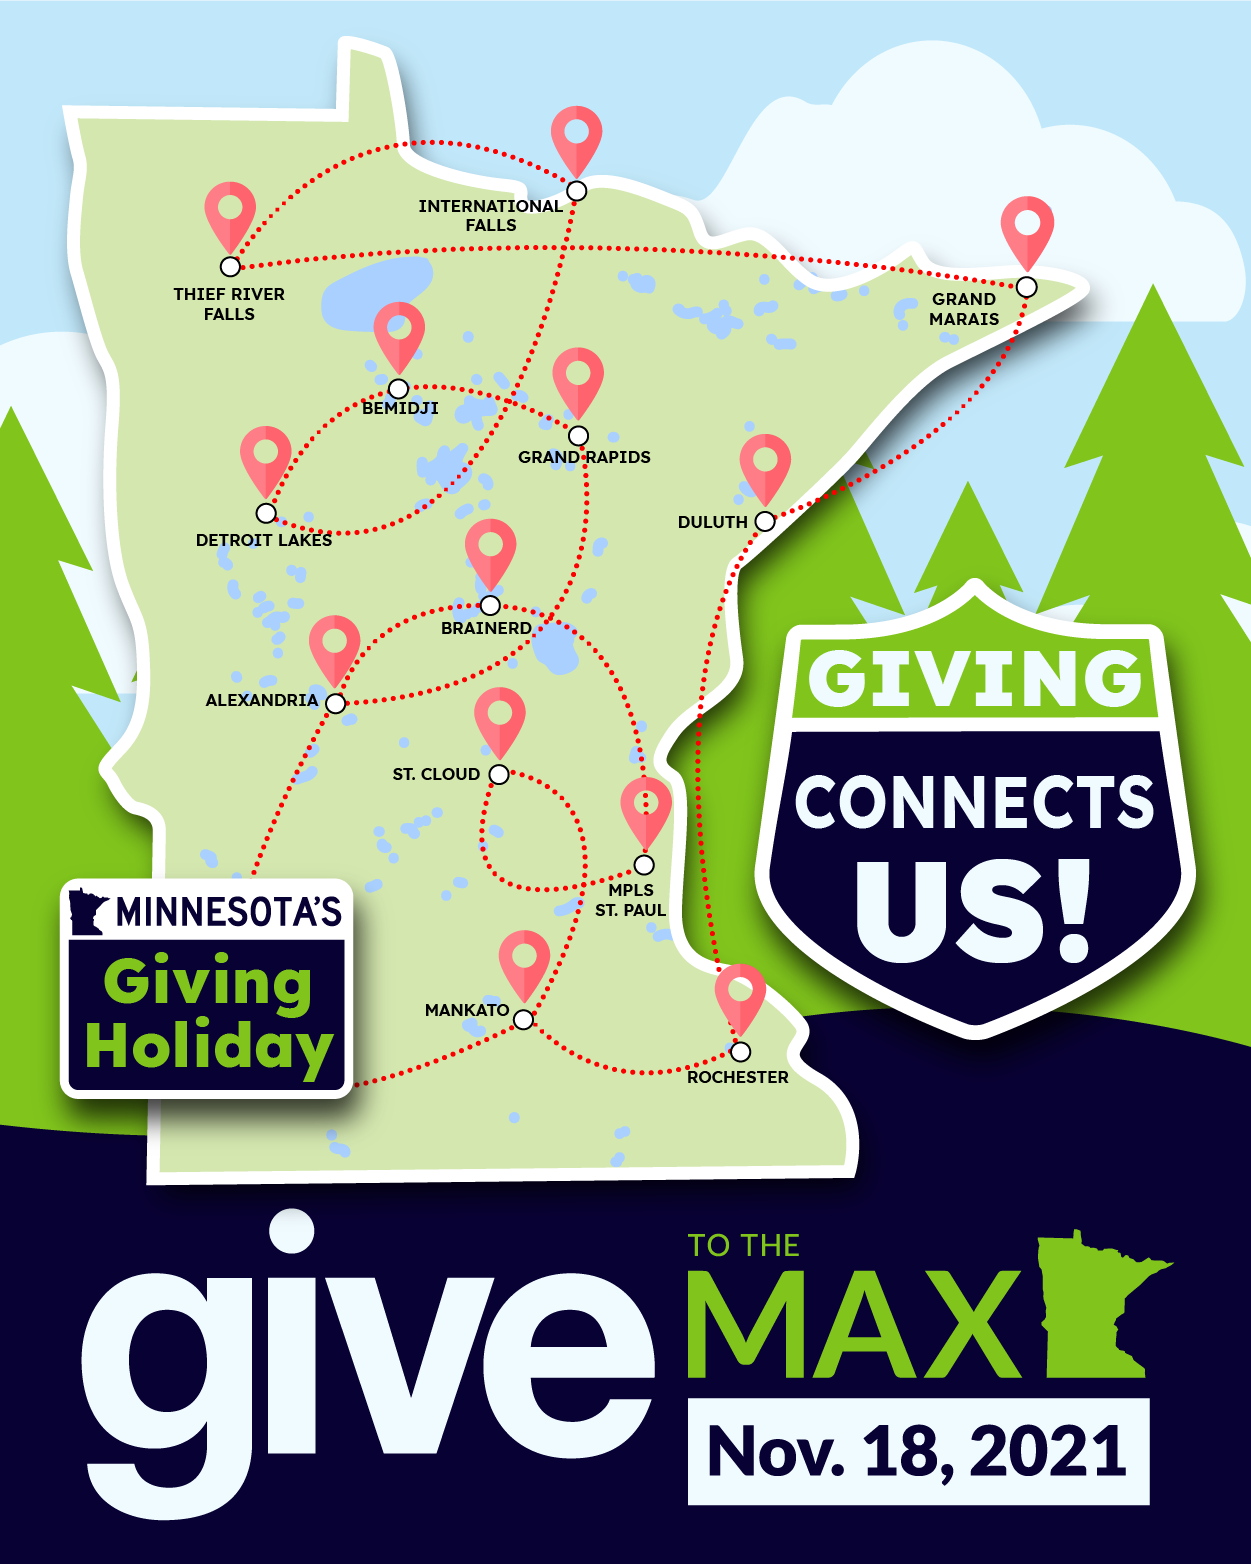 Map of Minnesota over illustrated landscape of evergreen trees and clouds with road signs for 'Minnesota's Giving Holiday,' 'Giving Connects Us!,' '#GTMD21 This Way' and word mark for Give to the Max, Nov. 18, 2021